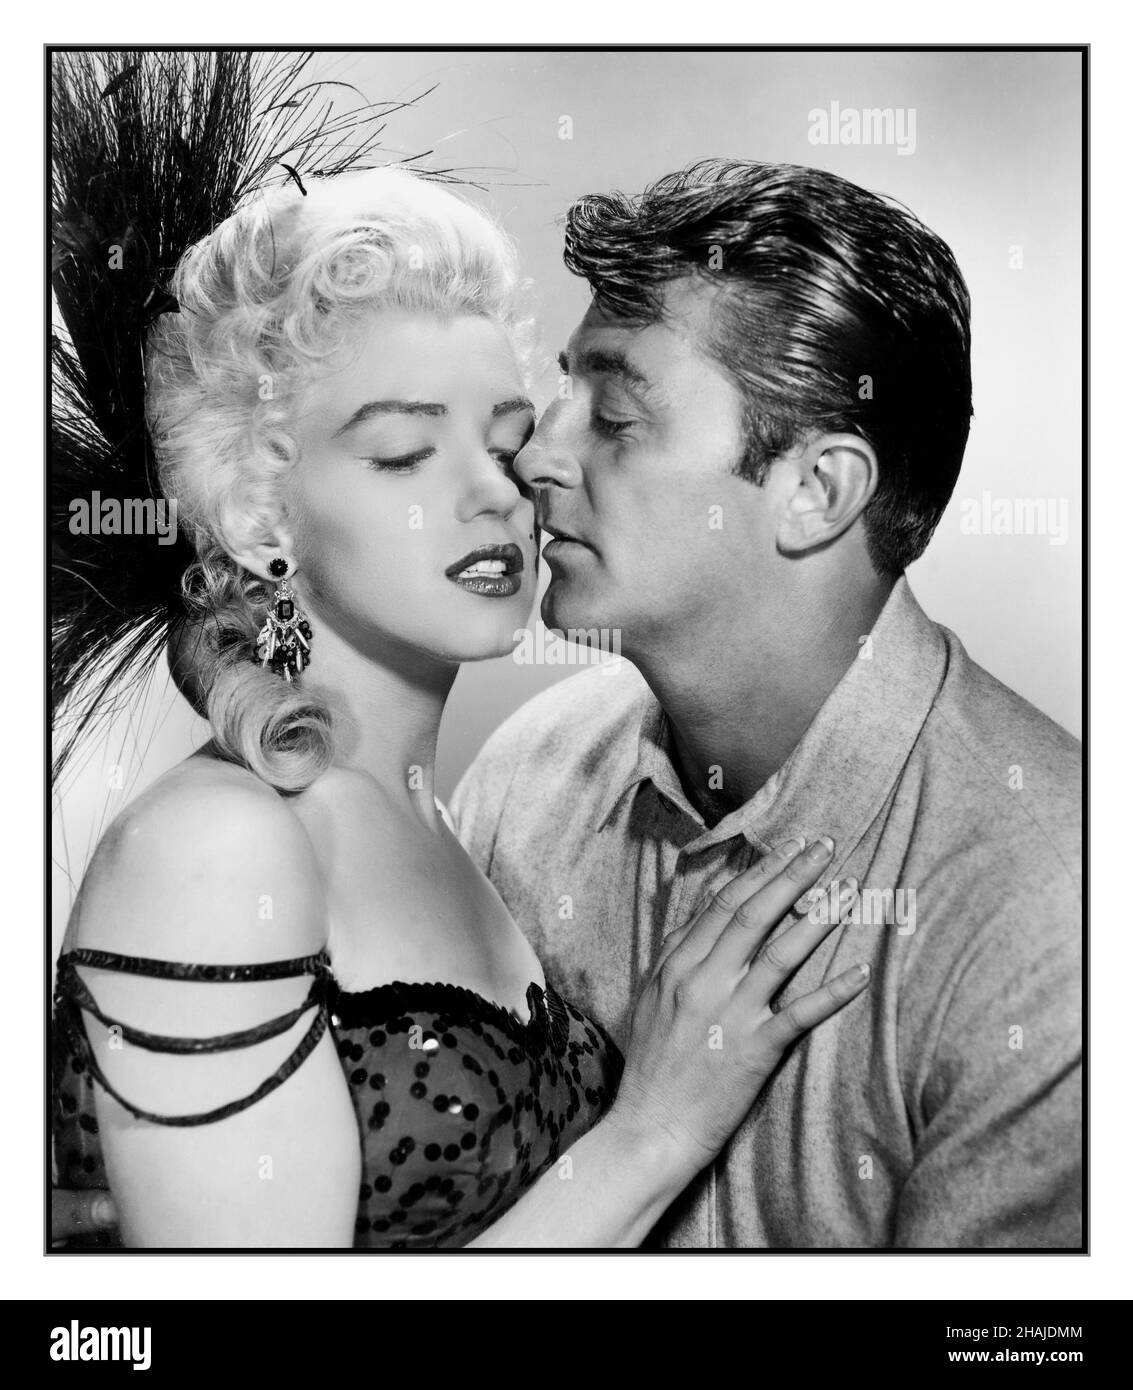 RIVER OF NO RETURN Vintage Film Movie Publicity still of 'River Of No Return' starring Robert Mitchum, Marilyn Monroe 1954  copyright with 20th Century Fox. River of No Return is a 1954 American Western film directed by Otto Preminger and starring Robert Mitchum and Marilyn Monroe. The screenplay by Frank Fenton is based on a story by Louis Lantz, who borrowed his premise from the 1948 Italian film Bicycle Thieves. The picture was shot on location in the Canadian Rockies in Technicolor and CinemaScope and released by 20th Century Fox. Stock Photo